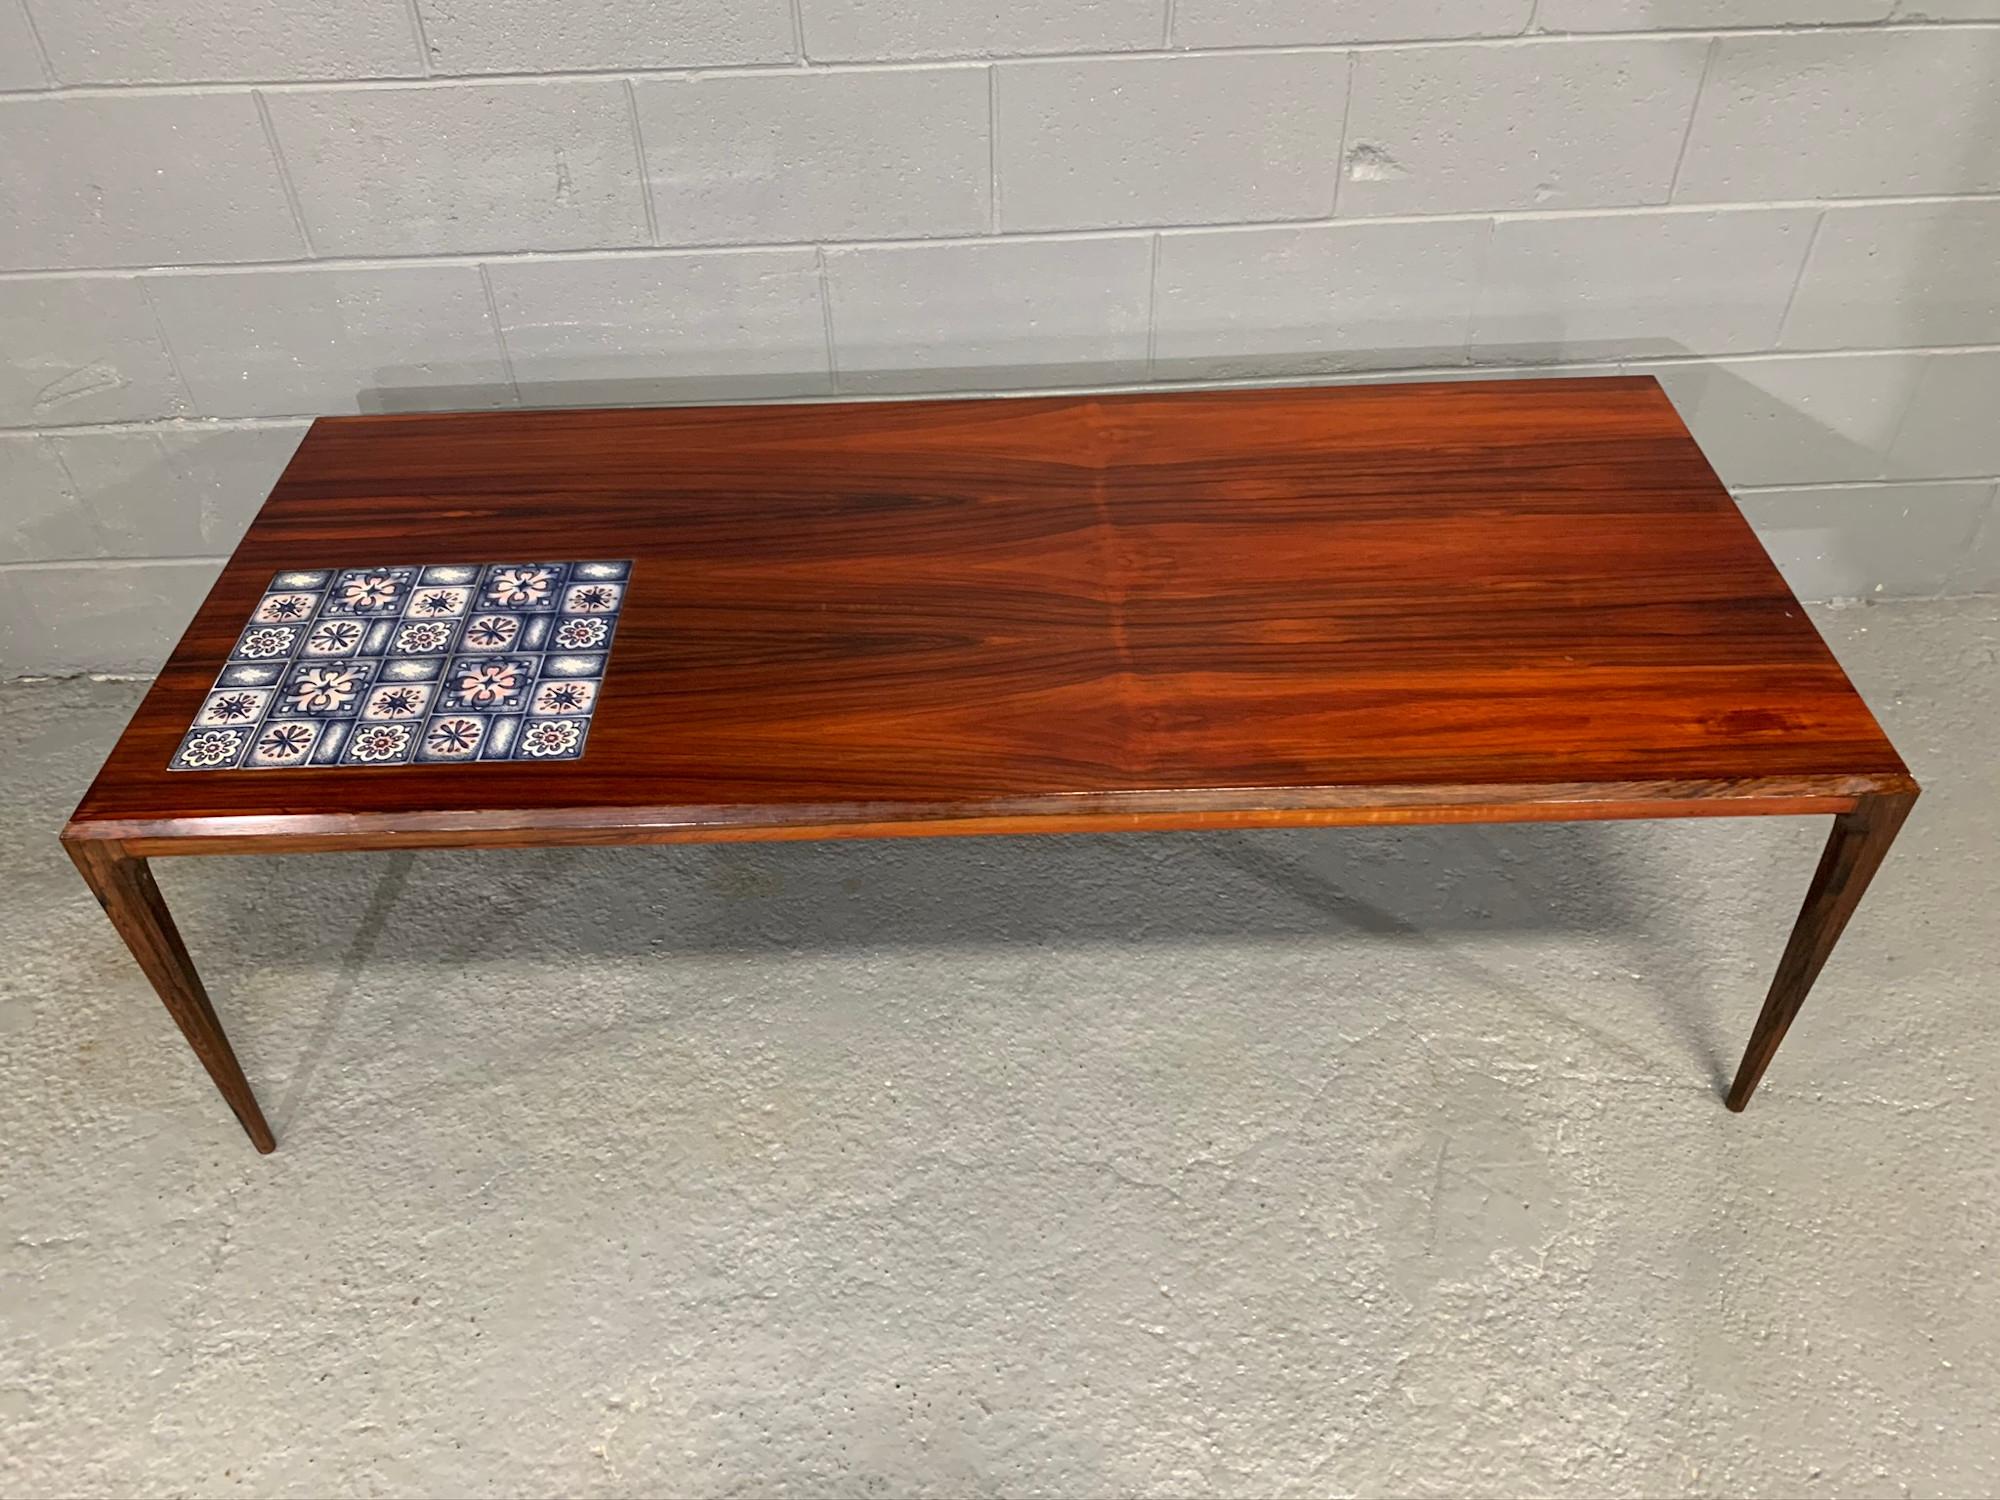 Mid-Century Modern 1960s rosewood coffee table with Royal Copenhagen tiles designed by Johannes Andersen and manufactured by Silkeborg Furniture.